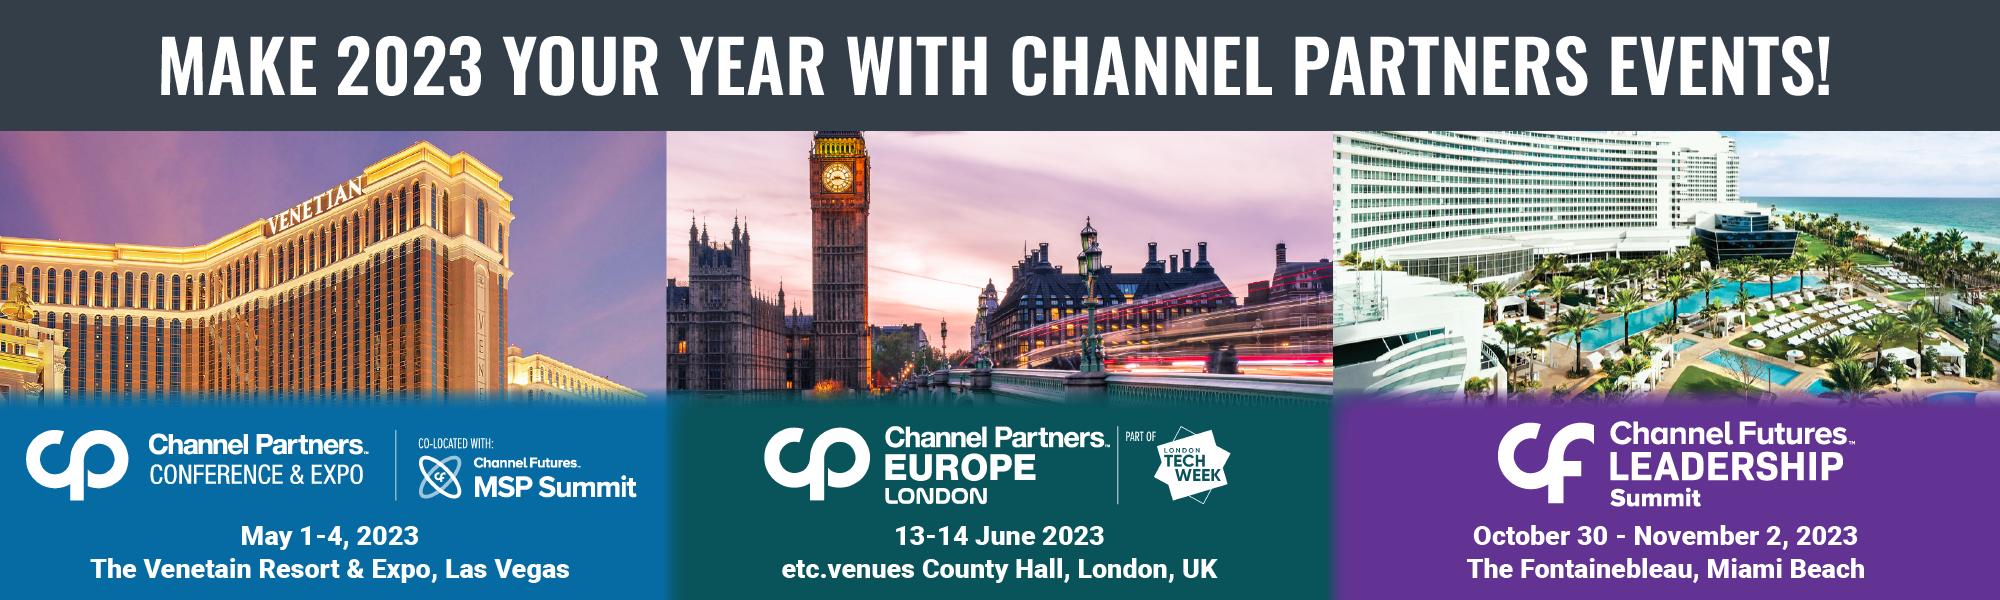 Make 2023 your year with Channel Partners events! Channel Partners Conference and Expo, co-located with Channel Futures MSP Summit, May 1-4, 2023, the Venetian Resort & Expo, Las Vegas. Channel Partners Europe London, part of London Tech Week, 13-14 June 2023, etc.venues Count Hall, London, UK. Channel Futures Leadership Summit, October 30-November 2, 2023, the Fontainebleau, Miami Beach